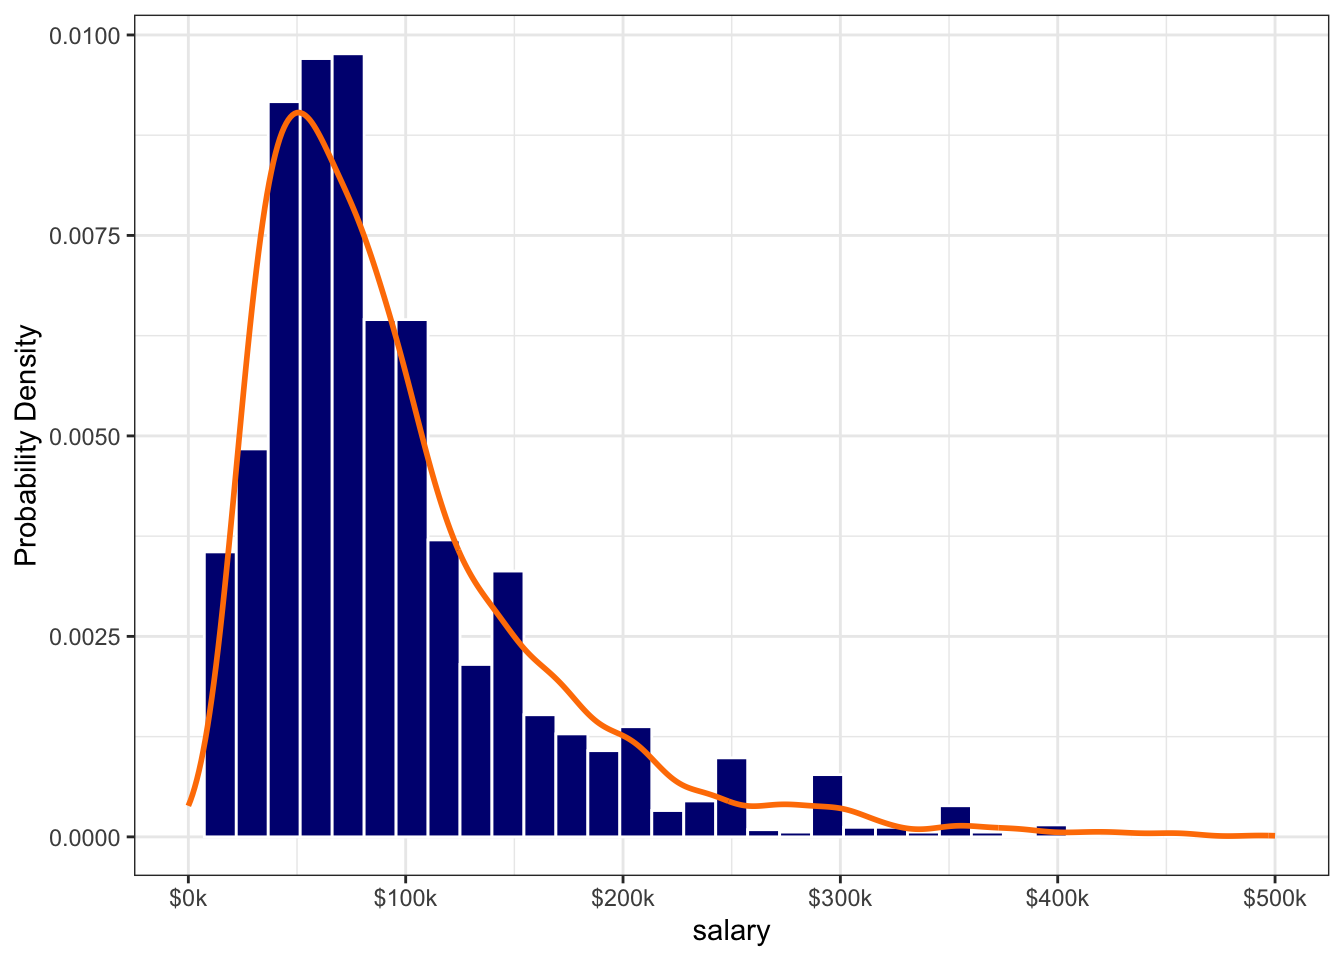 Salary Data Fitted by a Lognormal Distribution